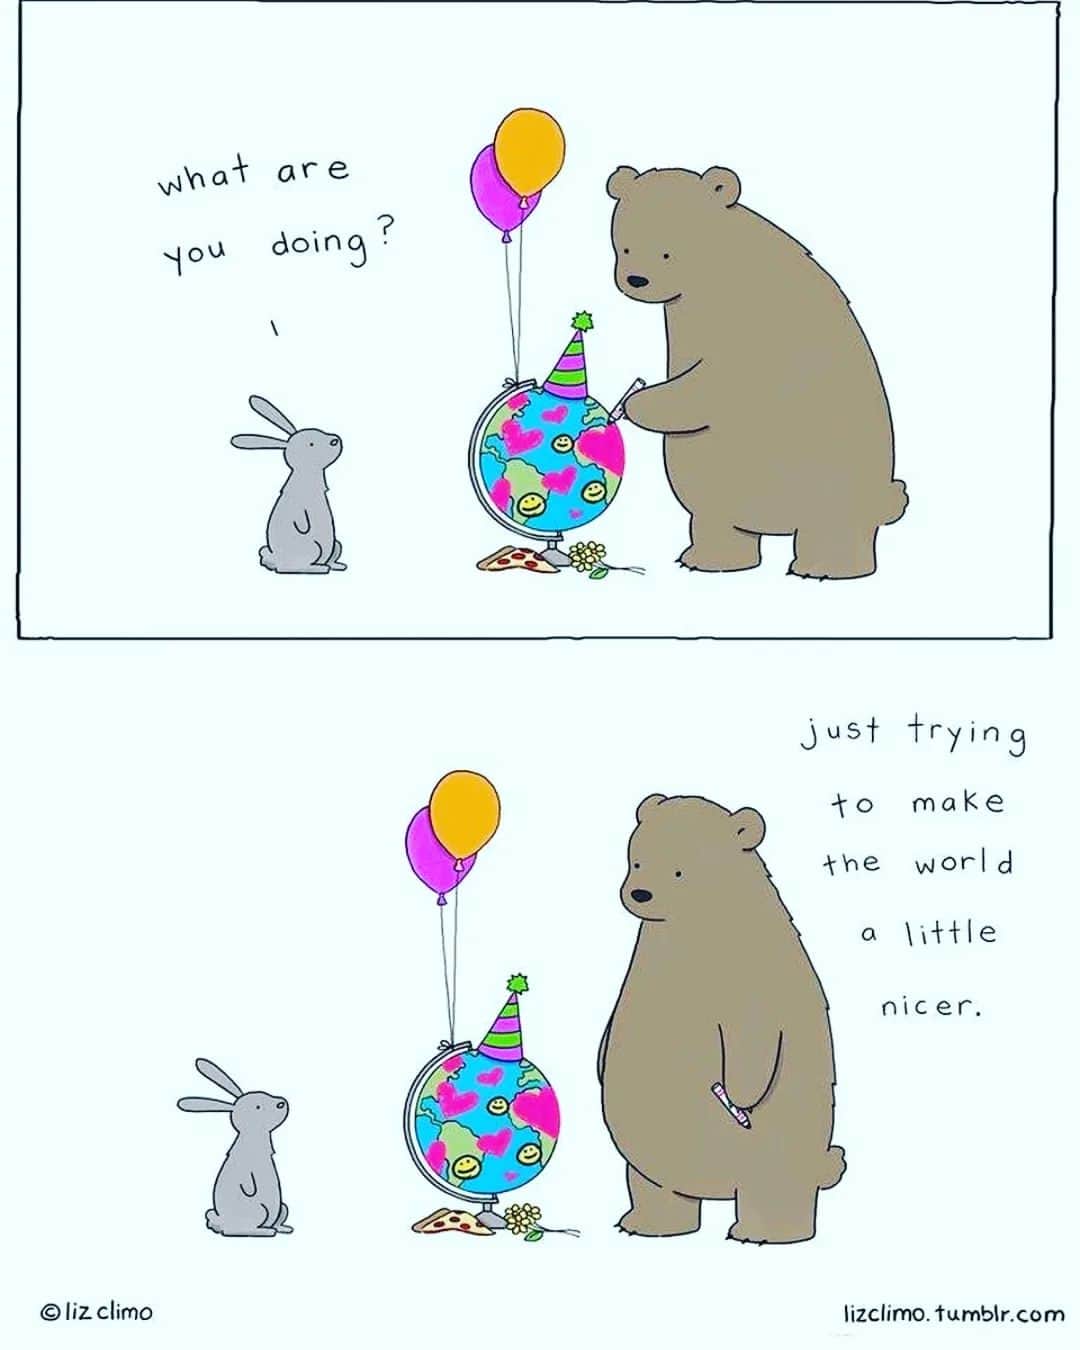 Bearsのインスタグラム：「We need definitely more of this!! 🌍🕊 💞  Lets spread as many ❤️'s as we can!!  📸: @lizclimo  #bear #bears #bearcub #cub #animal #animals #saveourbears #bearlove #savetheanimals #love #cute #sweet #adorable #nature #photo #wildlife #photography #wildlifephotography #lovely #animallove #belovedbears #bunny #rabbit #peace」